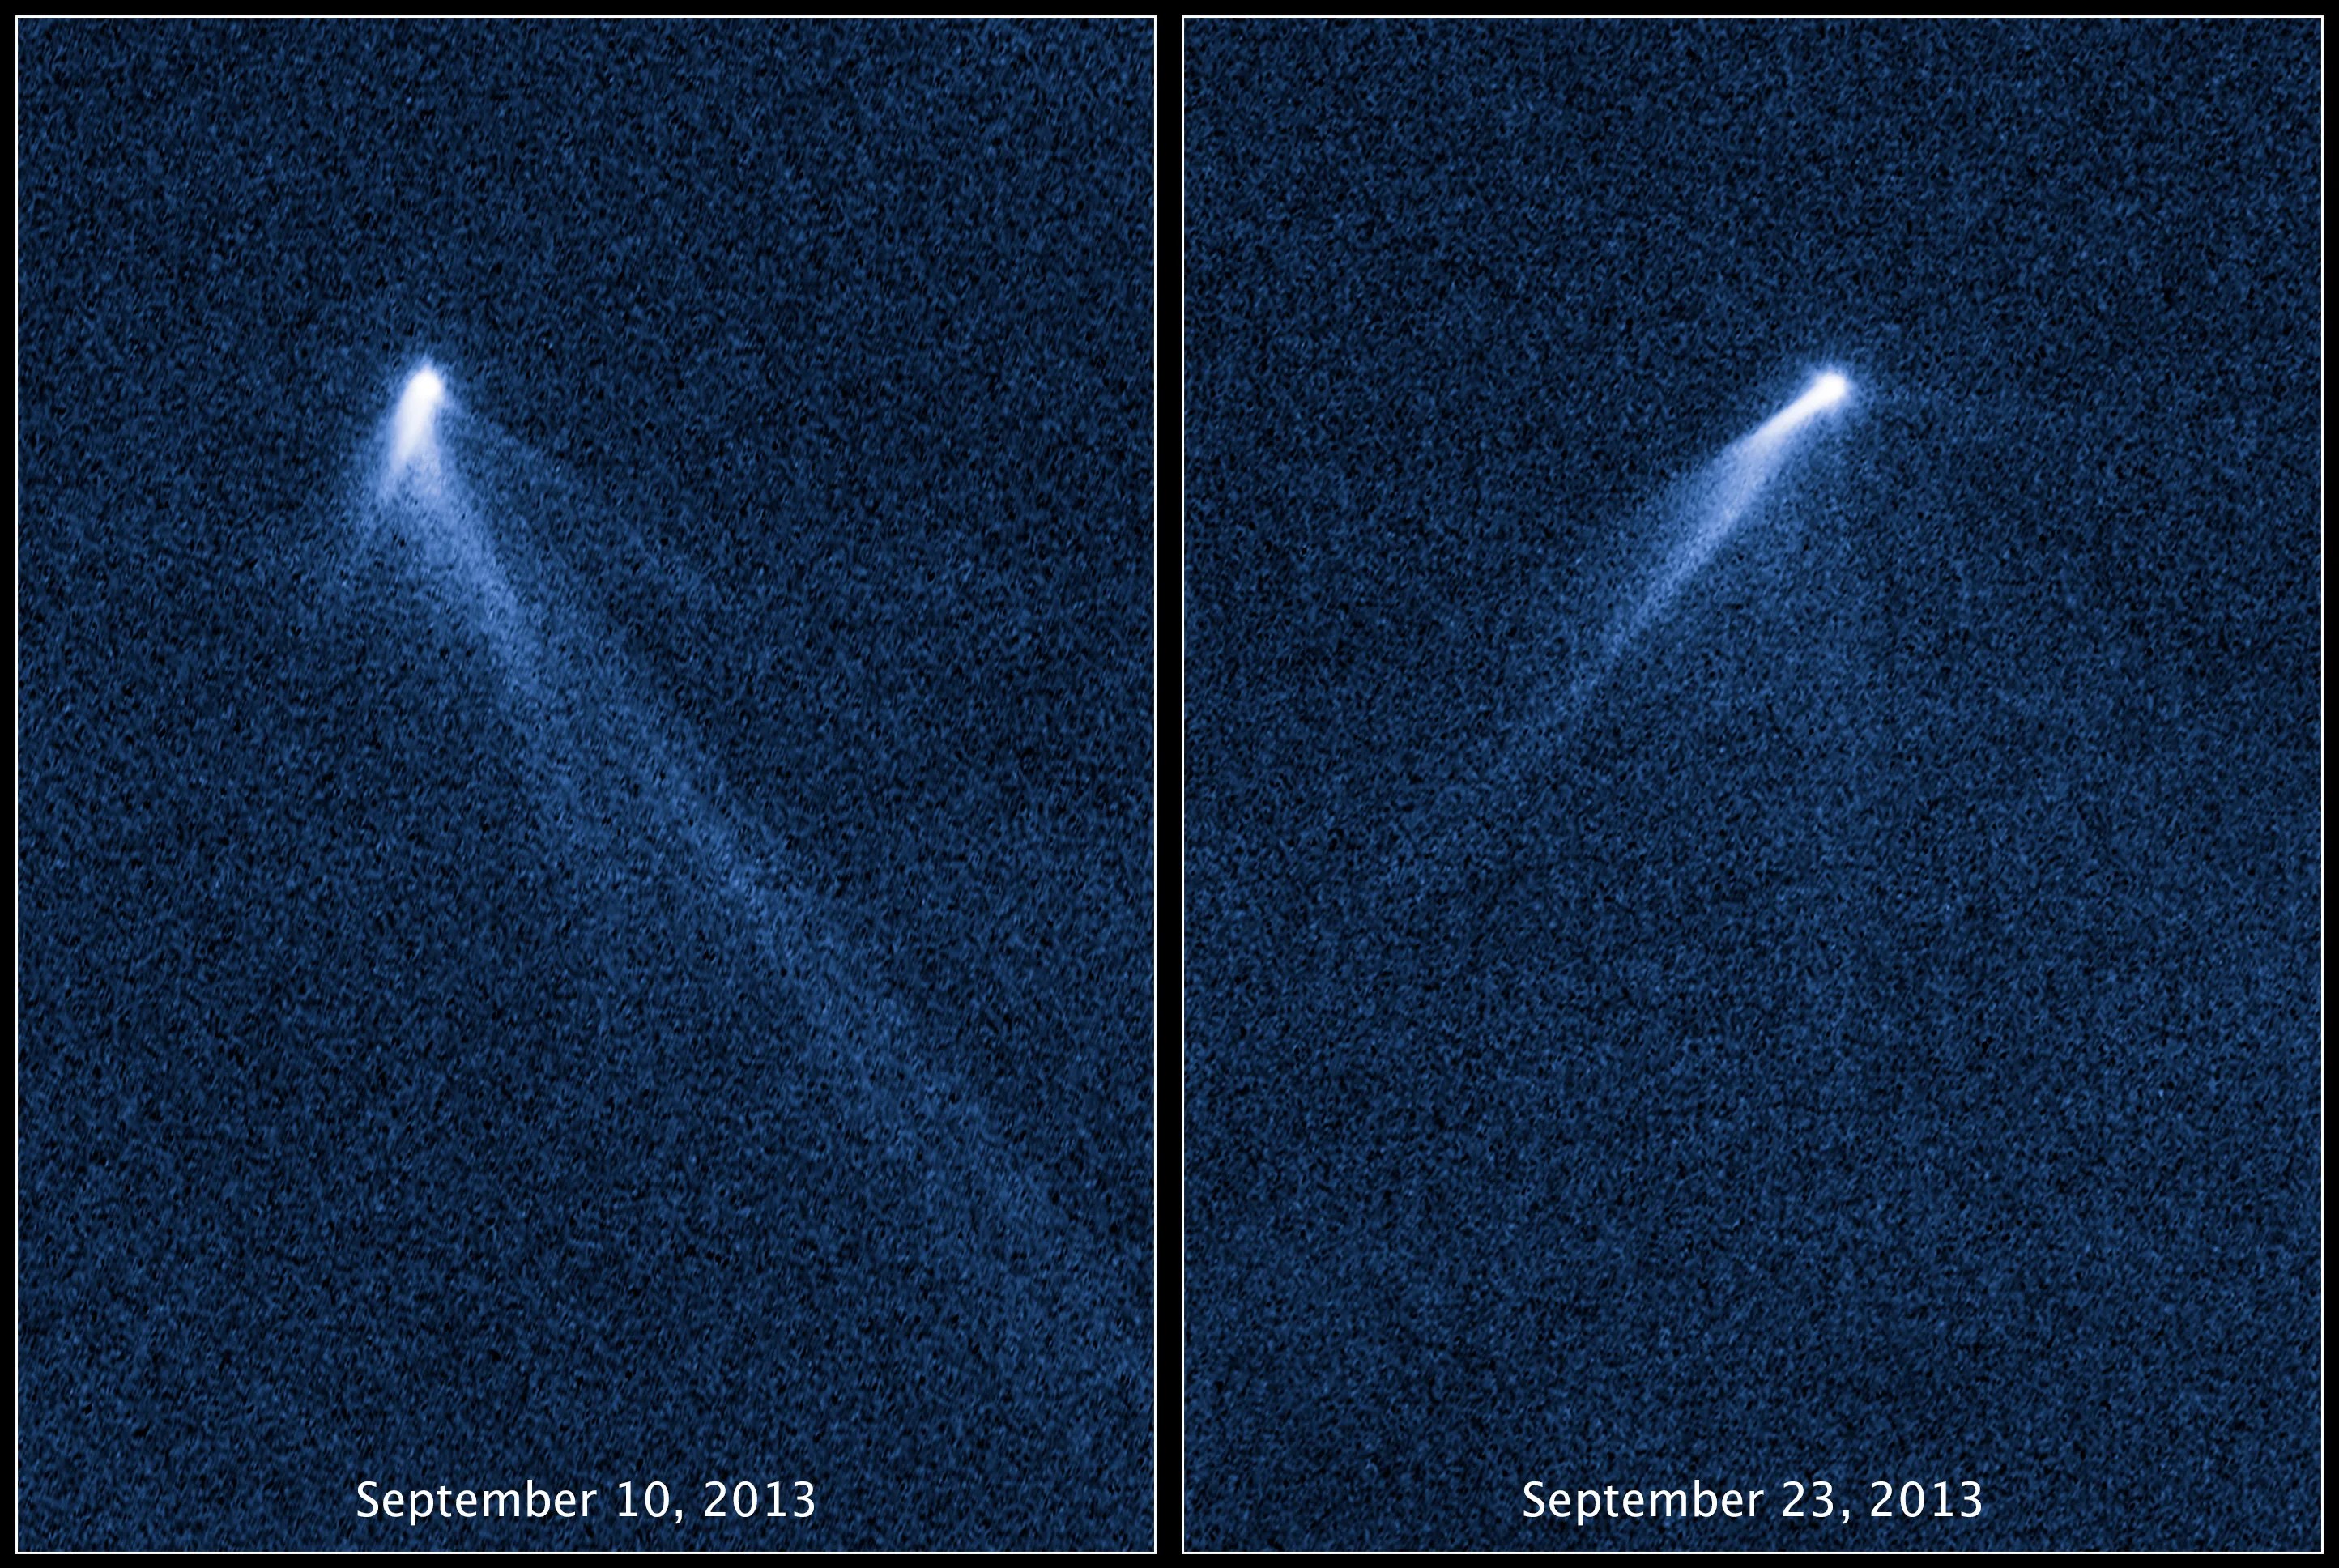 Left: Bright, blue-white asteroid at top with a tail extending toward the center bottom. Right: Bright, blue-white asteroid at top with a fainter tail extending to the center-left.